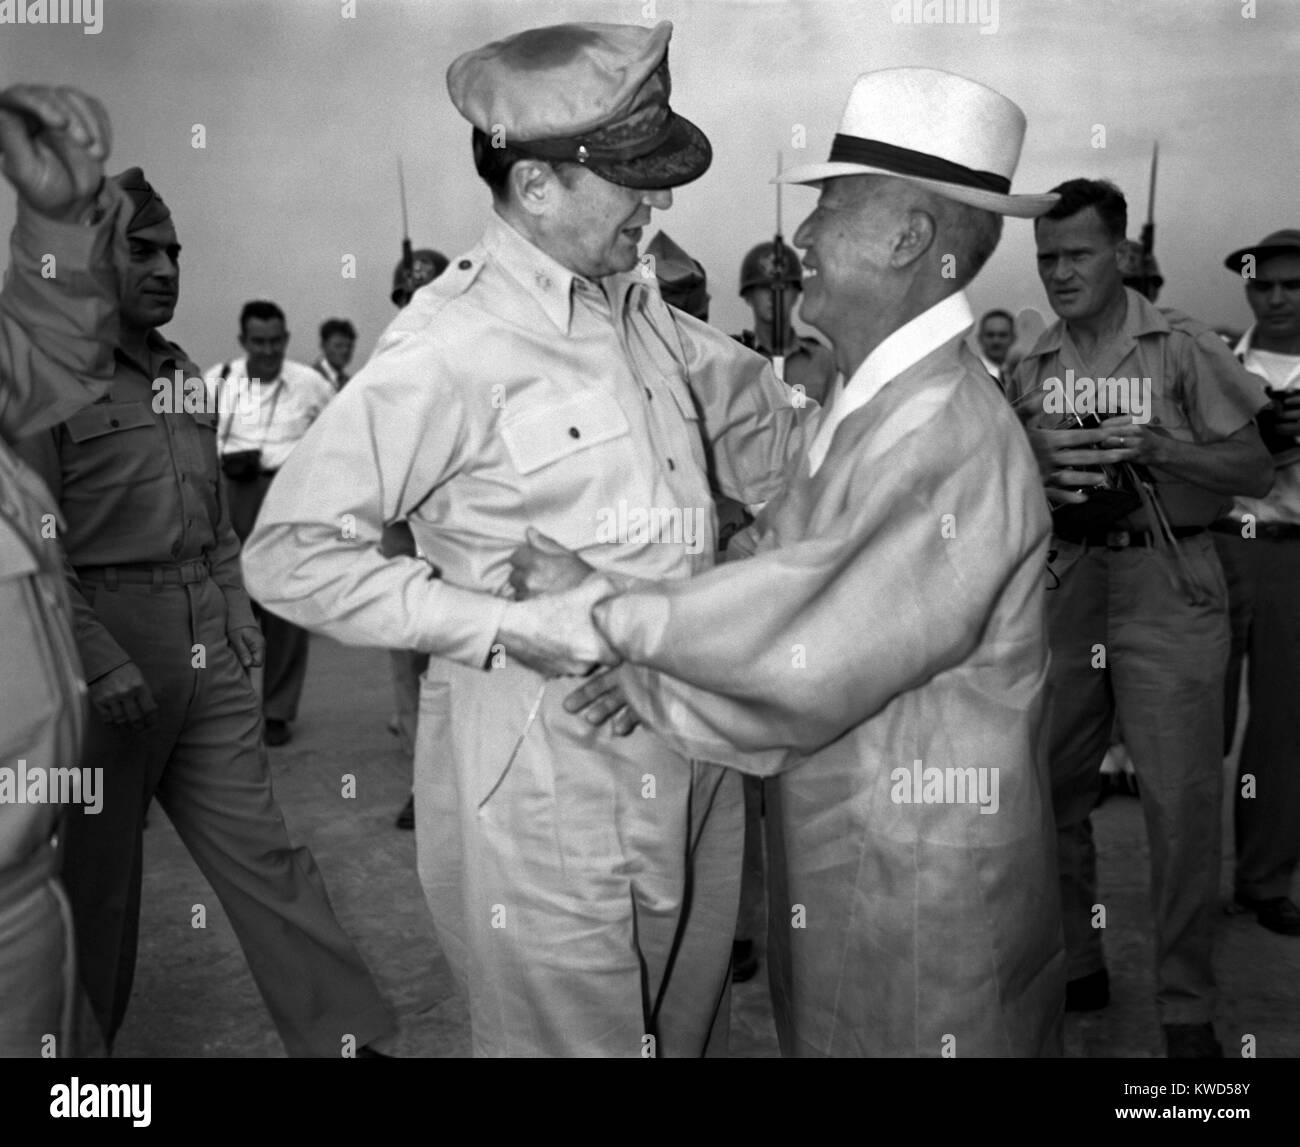 General Army Douglas MacArthur is welcomed by Dr. Syngman Rhee at Kimpo Air Force Base. MacArthur accepted Rhee's invitation to attend his Inauguration as Korea's first President on August 15, 1948. (BSLOC 2014 11 252) Stock Photo